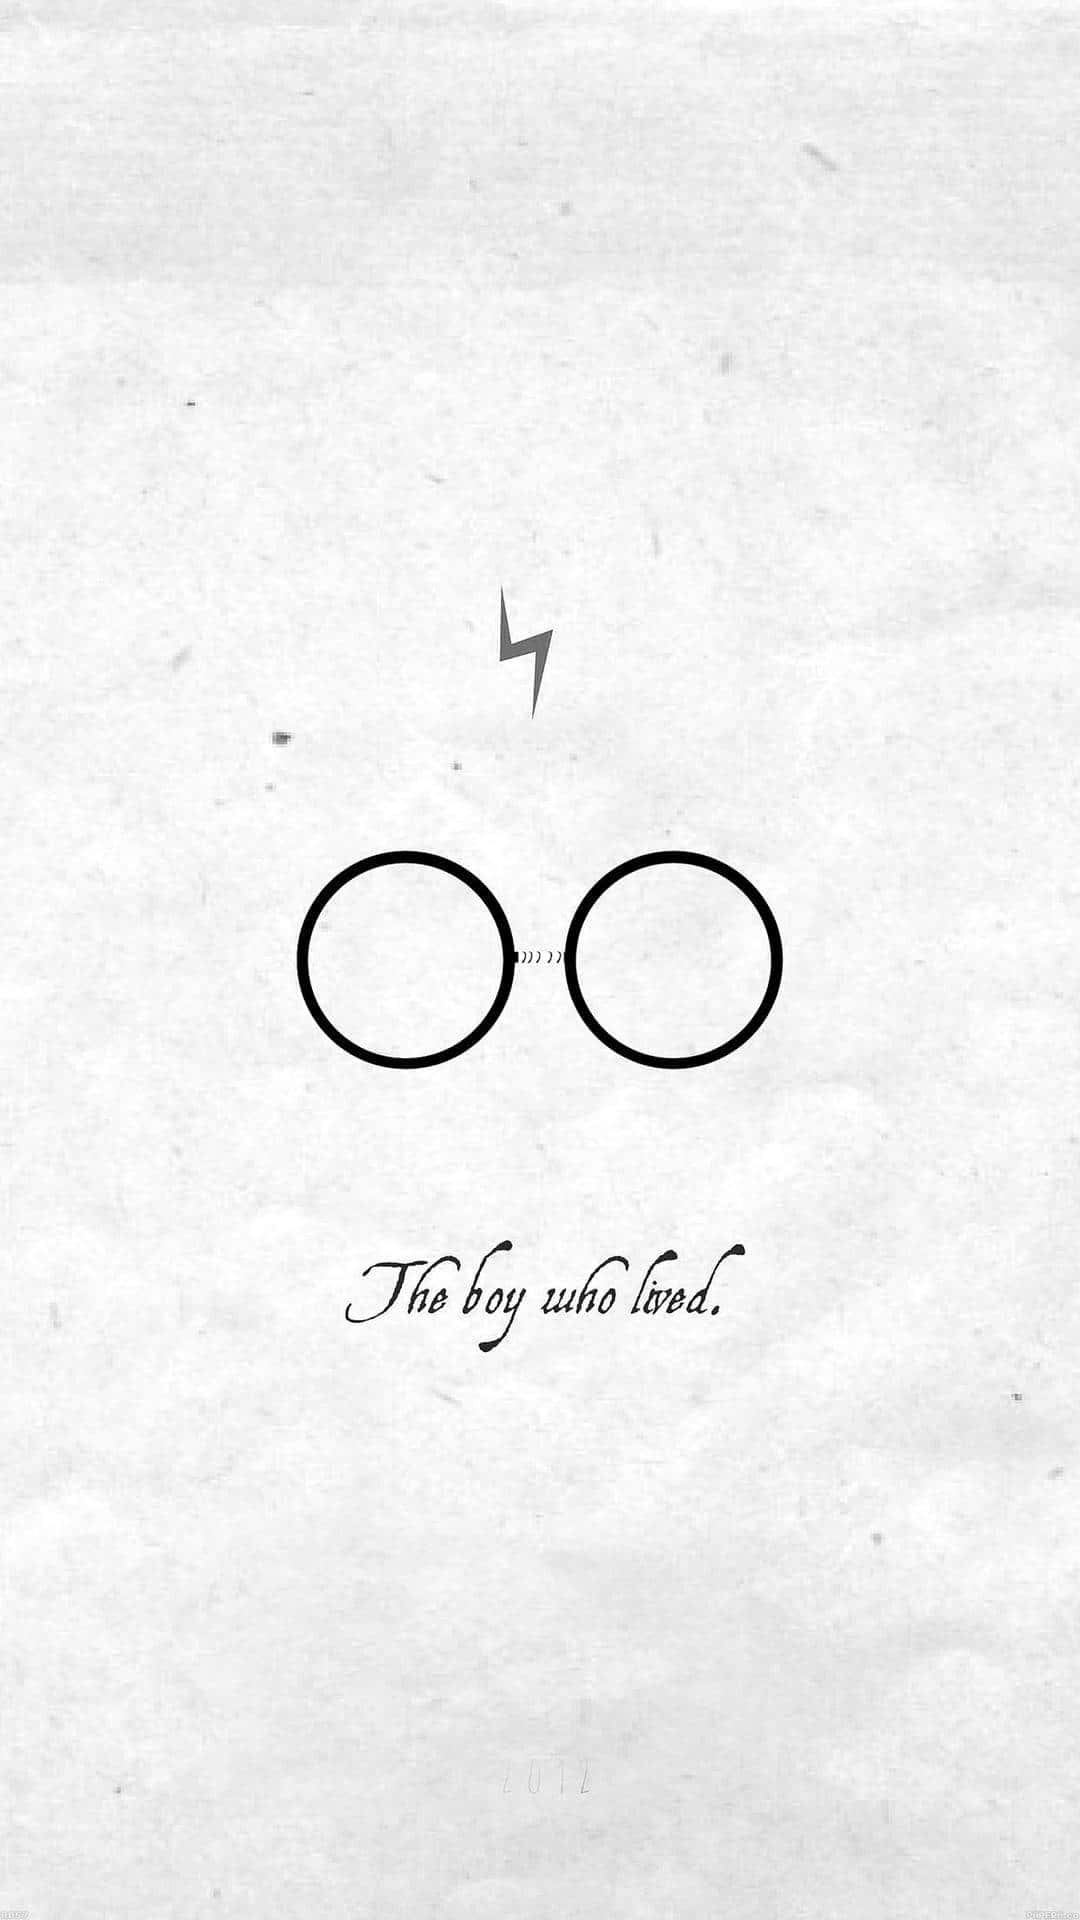 A magical moment captured - Harry Potter in black and white. Wallpaper